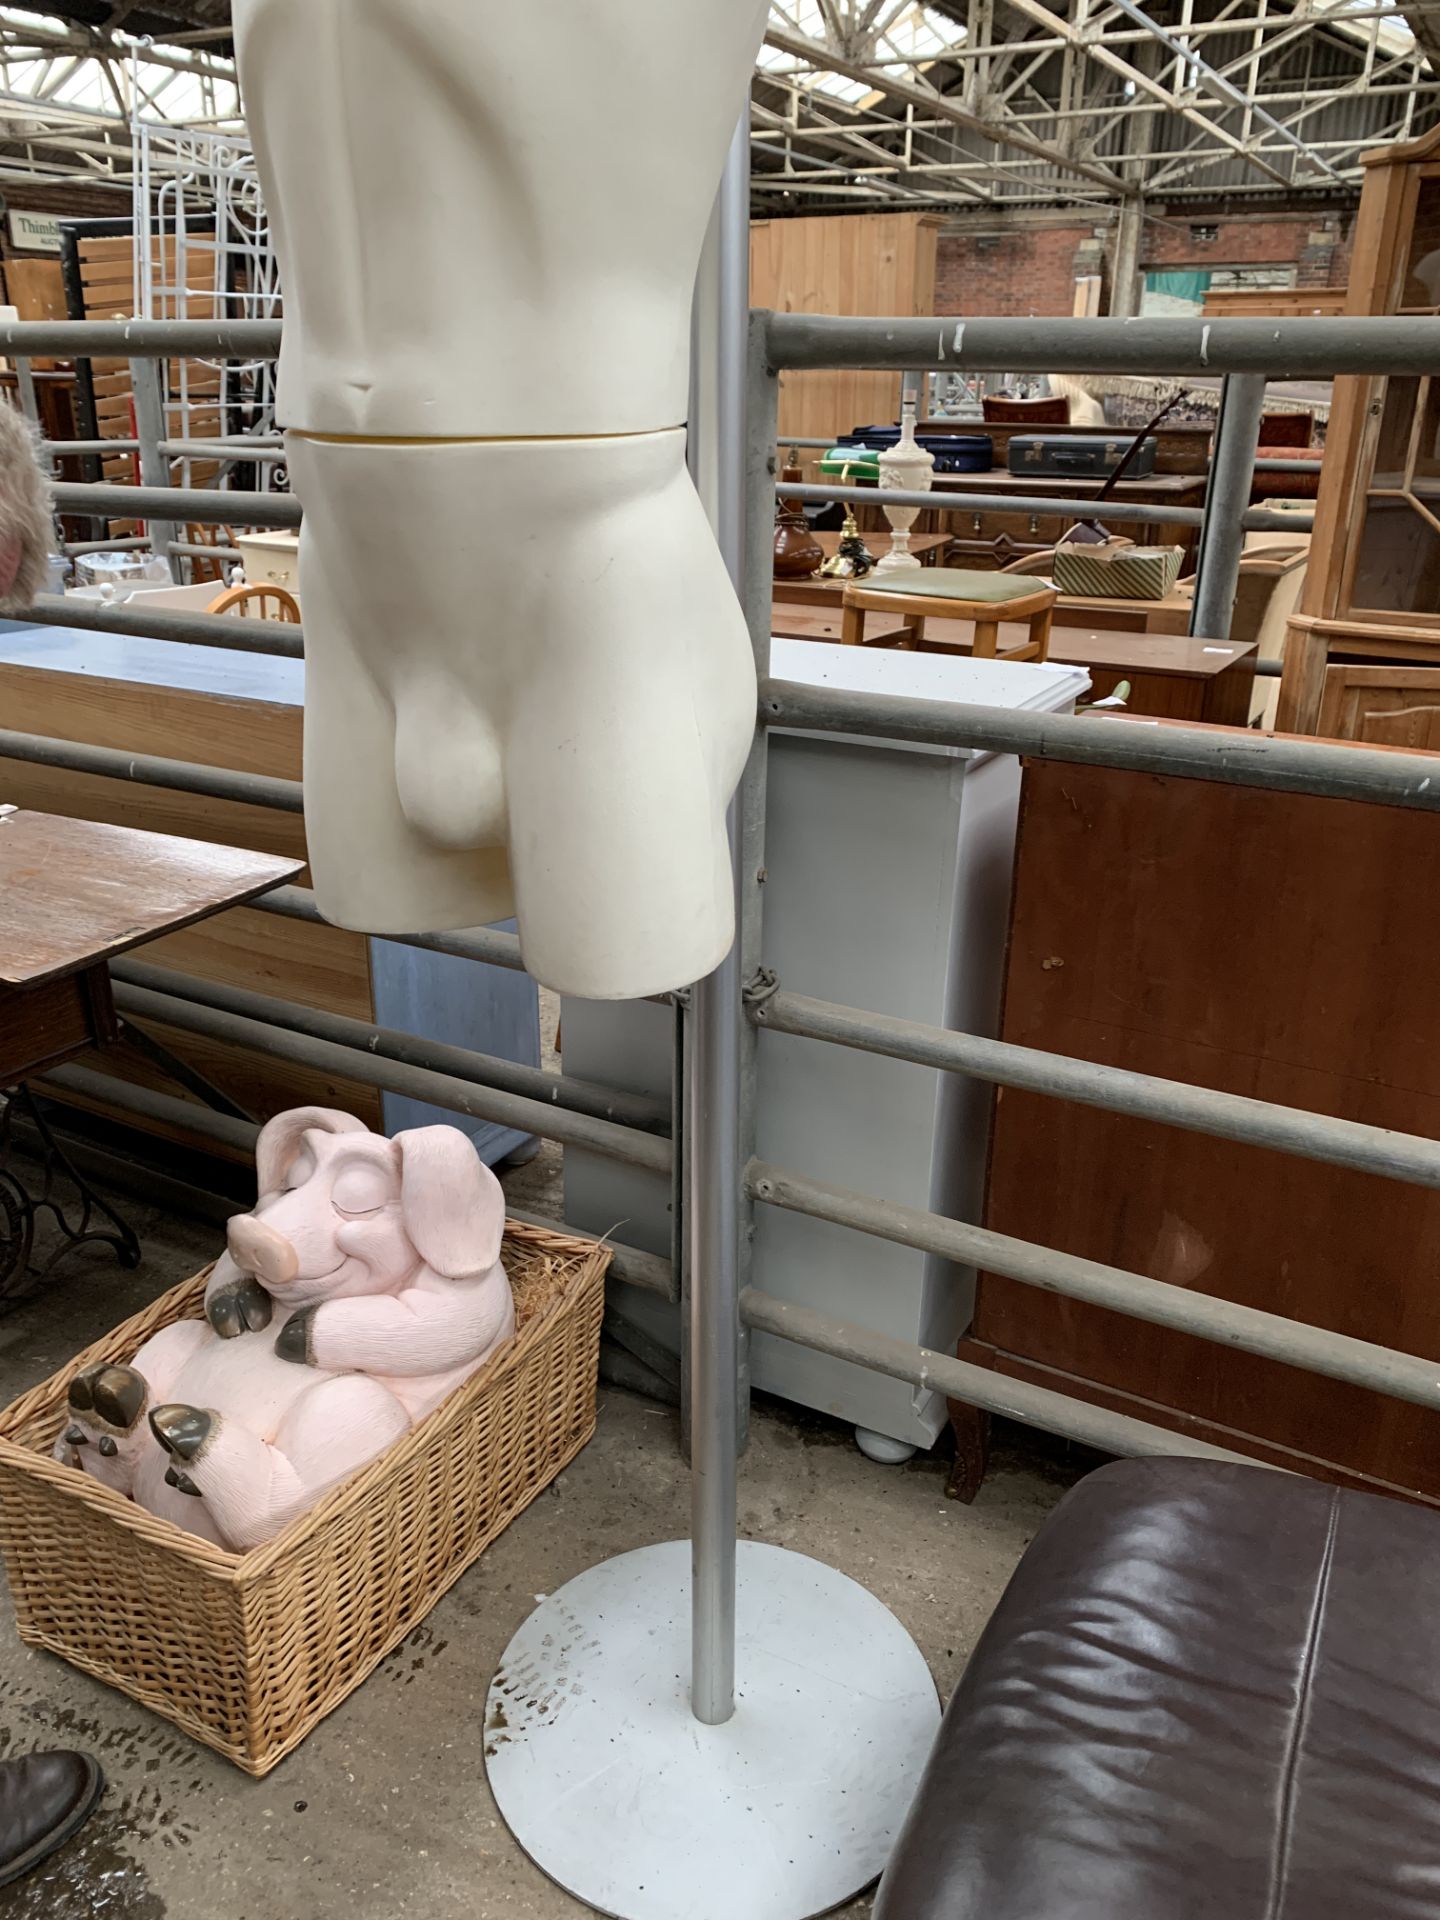 ALU male torso mannequin hanging from a metal support stand - Image 2 of 3